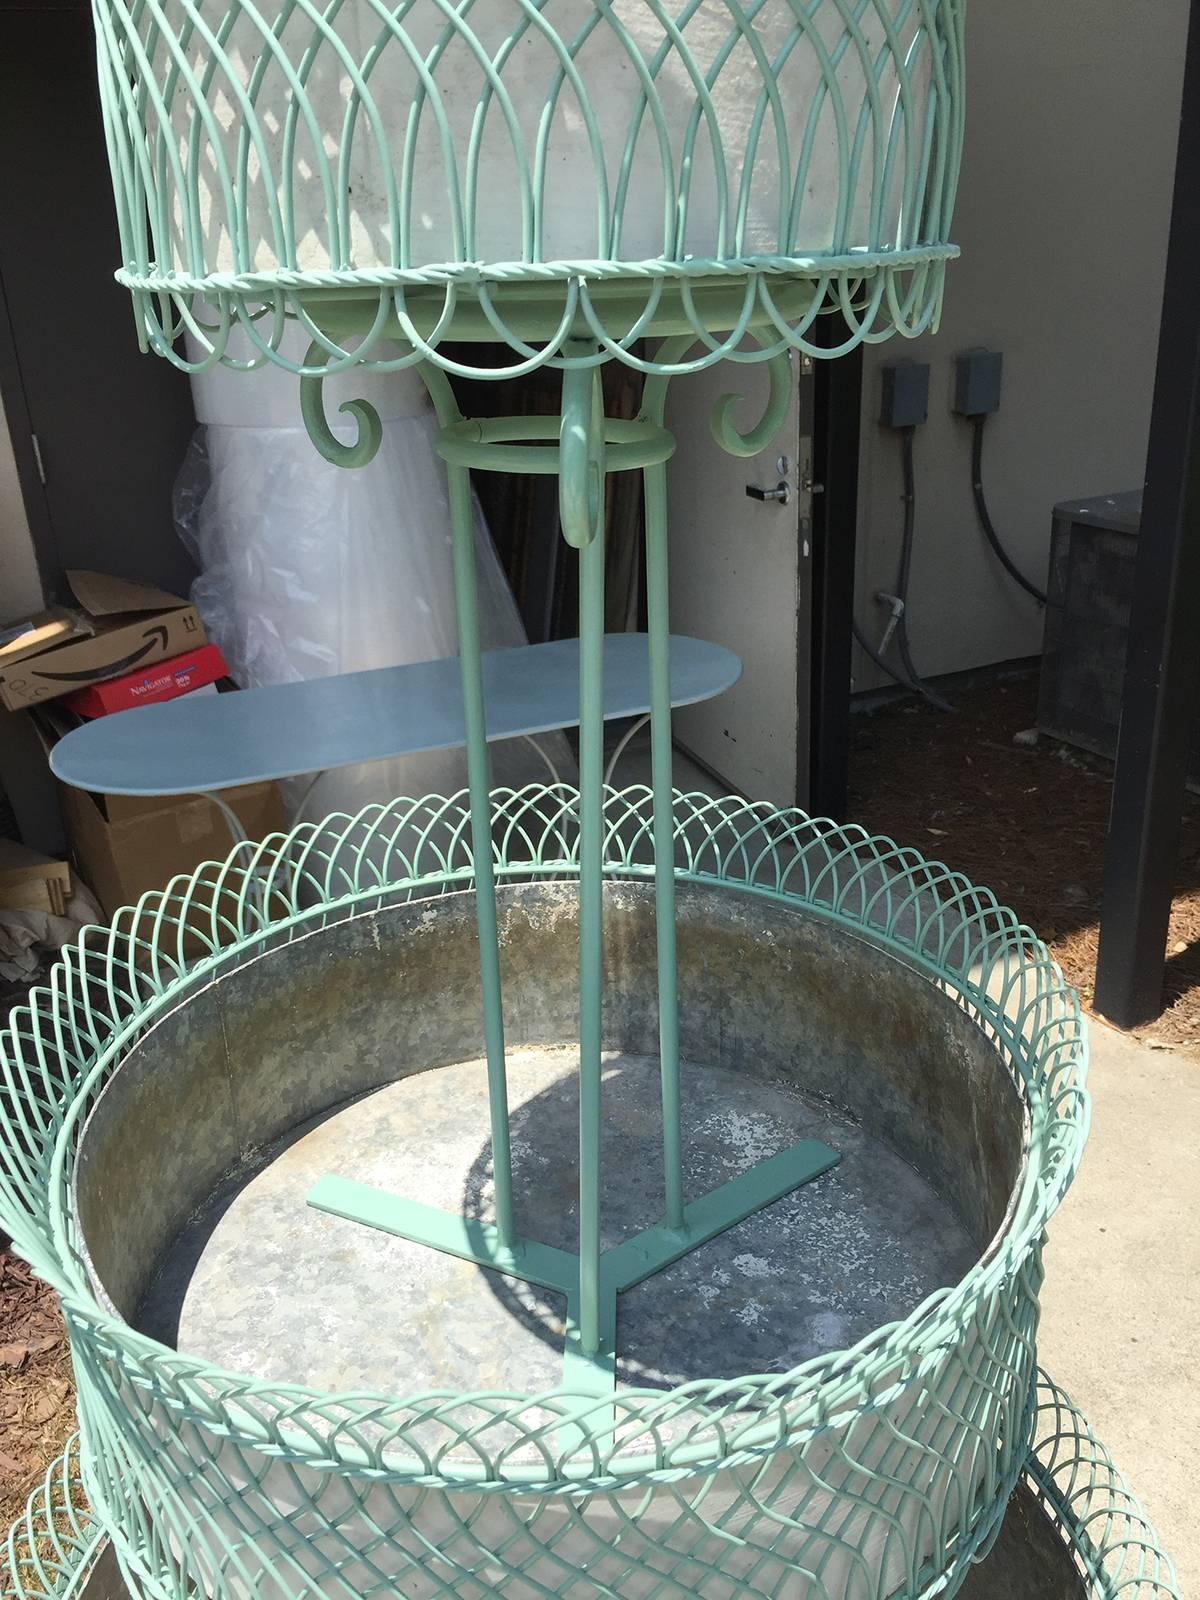 Probably French, circa 1900, an exceptional scaled three-tier wire planter, Sandleblasted and Painted, with old tole liners-(top: 14"diam, middle: 20.25"diam) Overall dimensions-26.5" diam x 72" T.